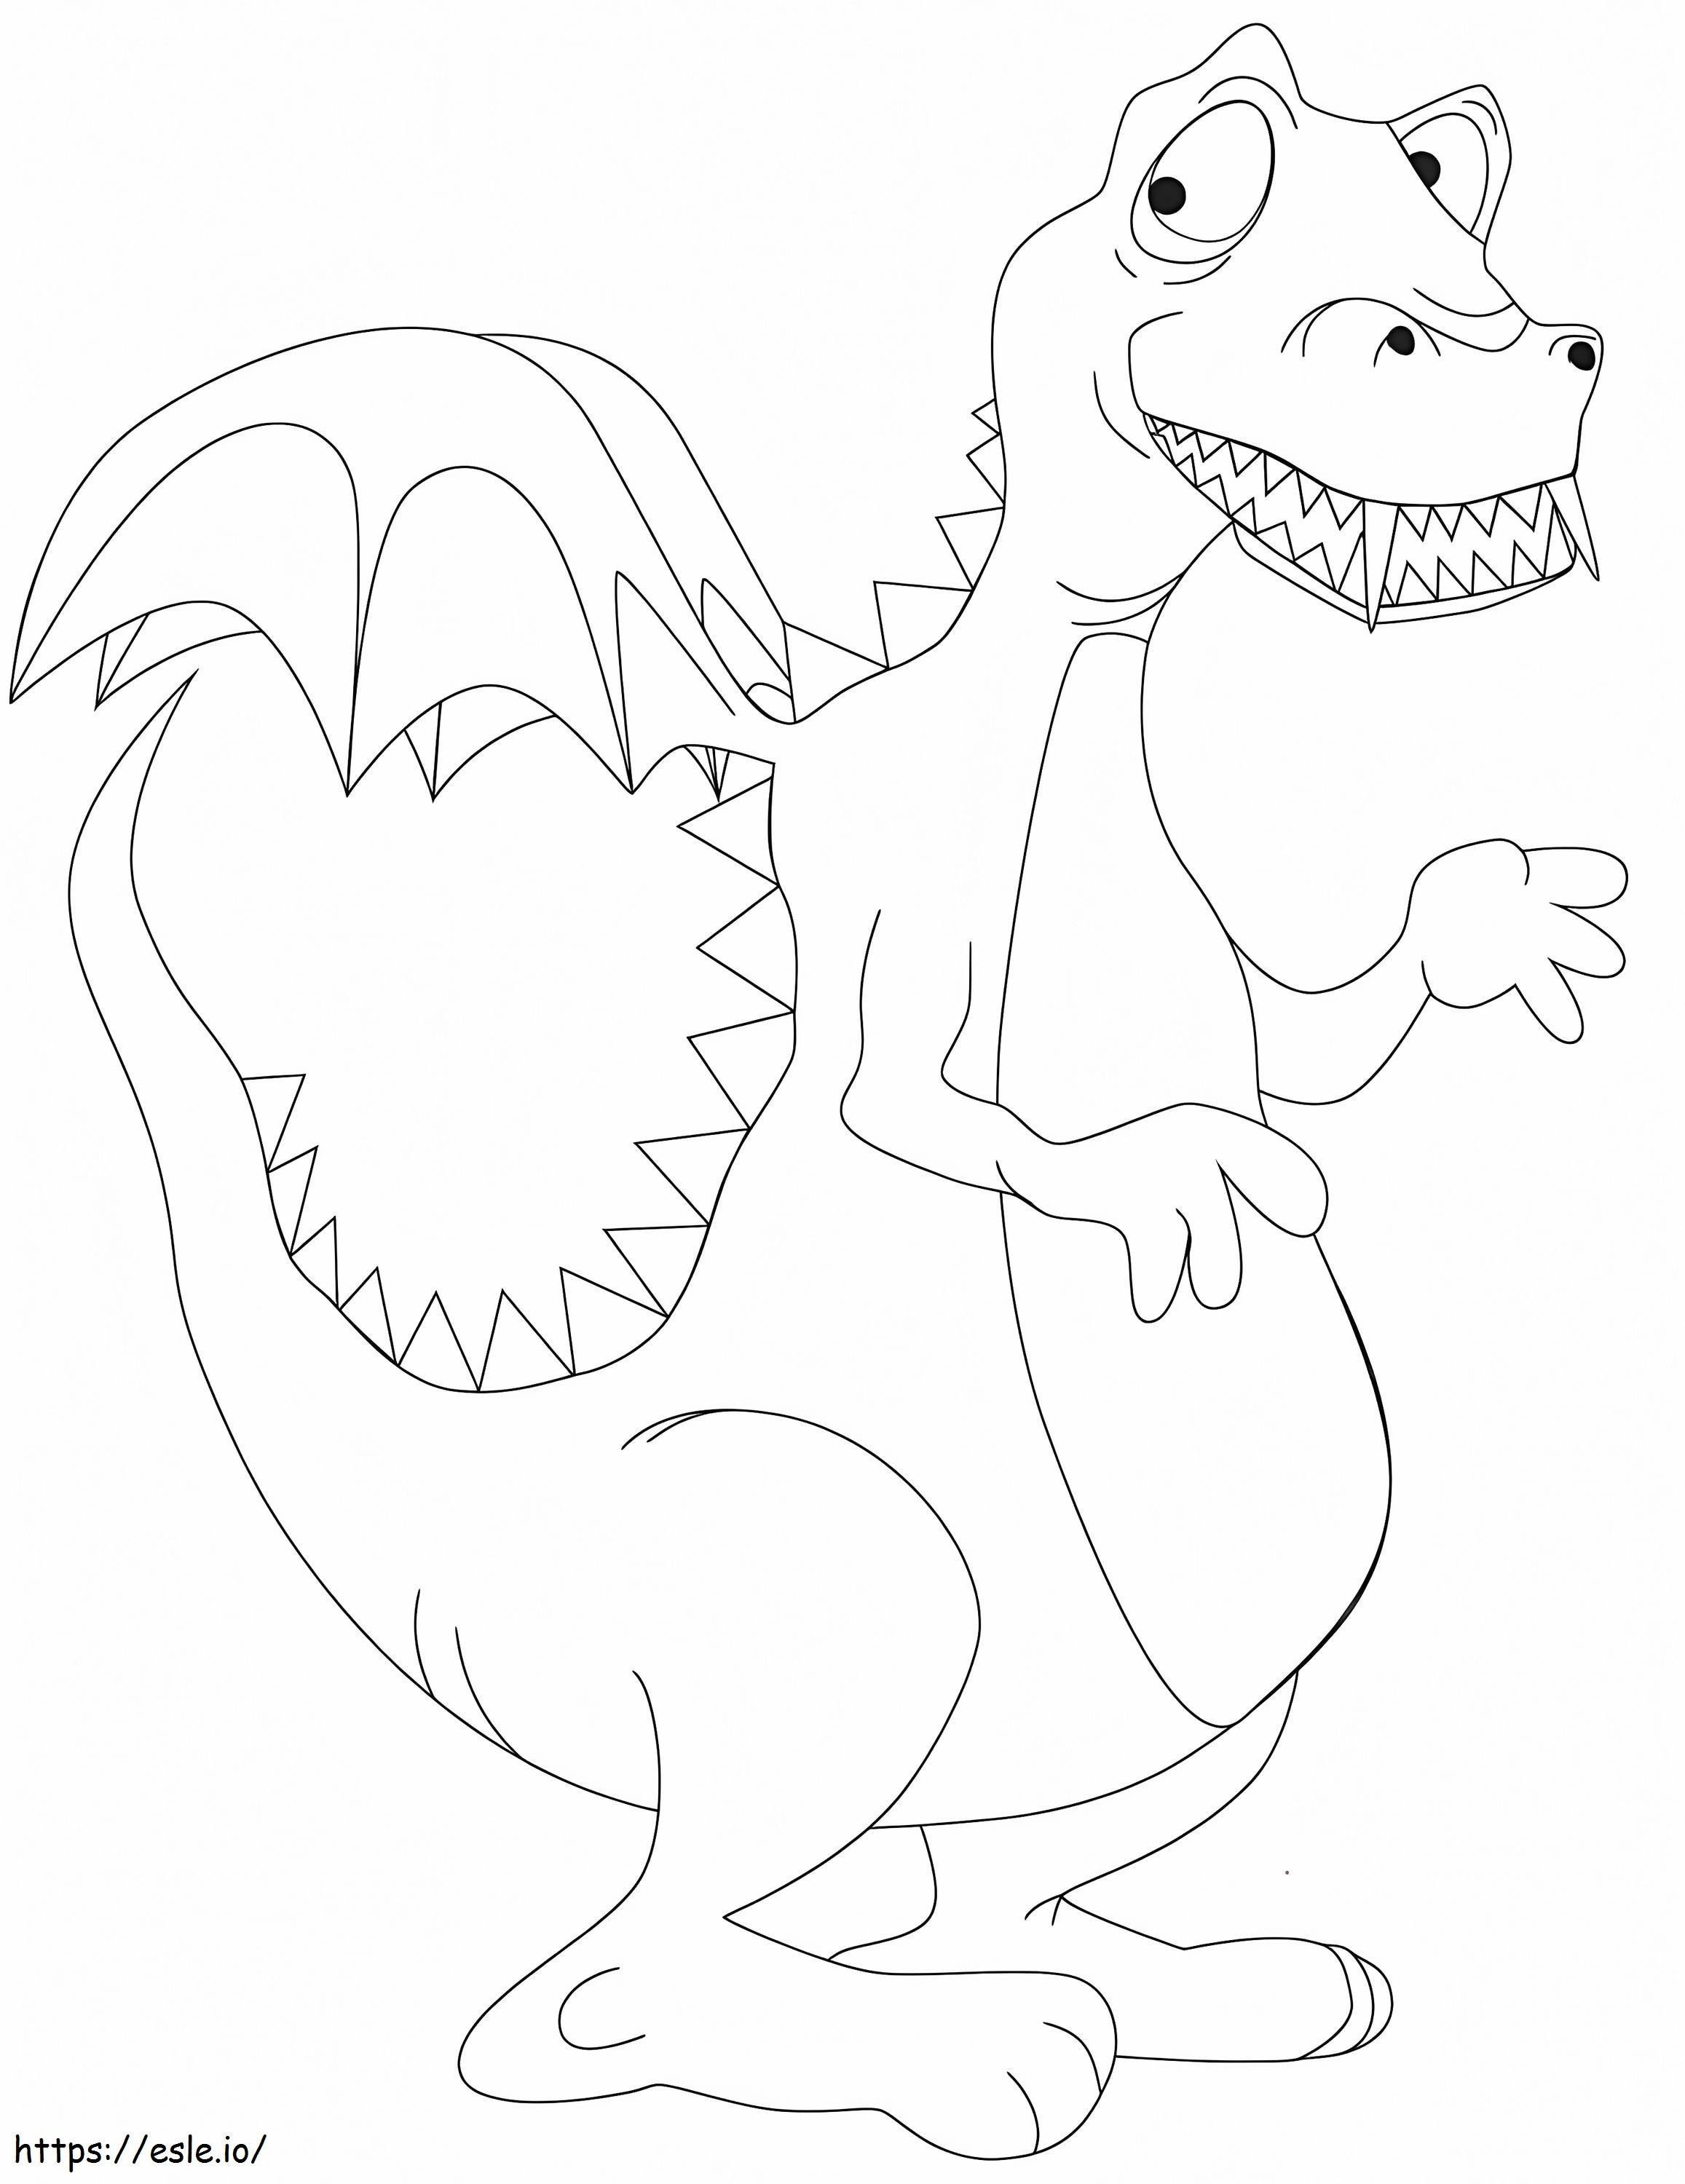 Dragon Is Shy coloring page